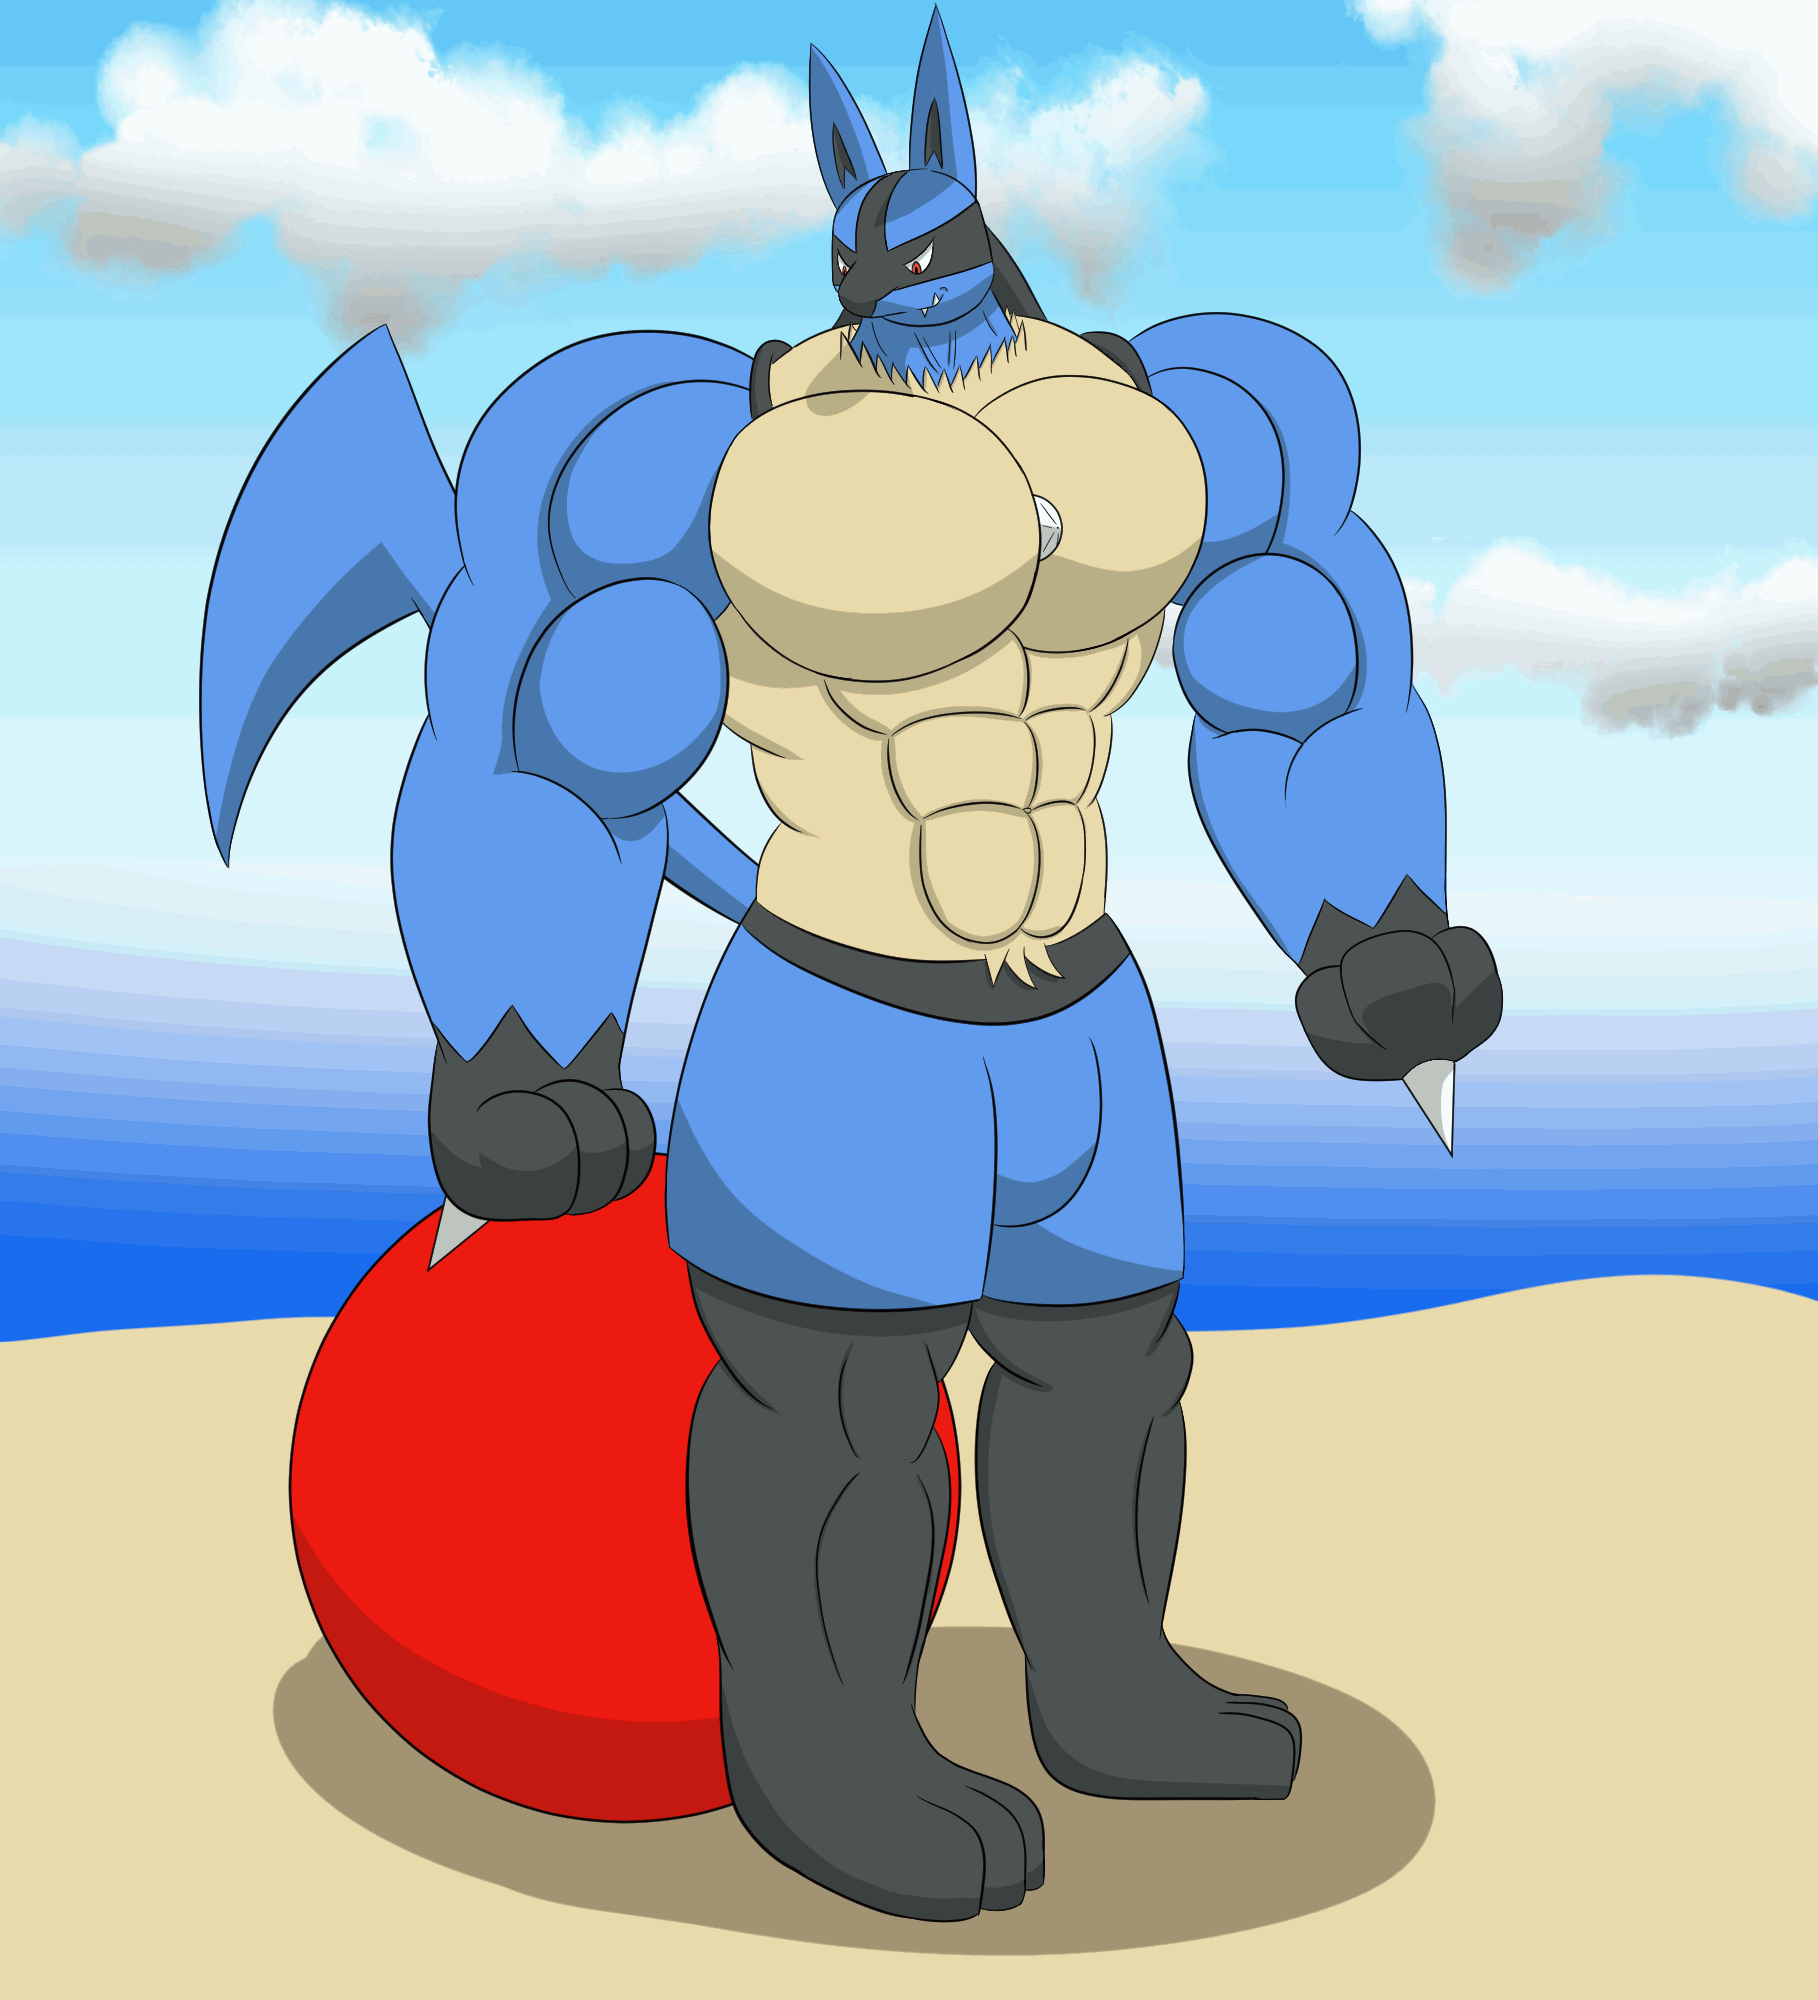 Dick expansion. Лукарио muscle growth. Lucario muscle growth giant. Покемон muscleartguy muscle growth. Лукарио бицепс muscle.